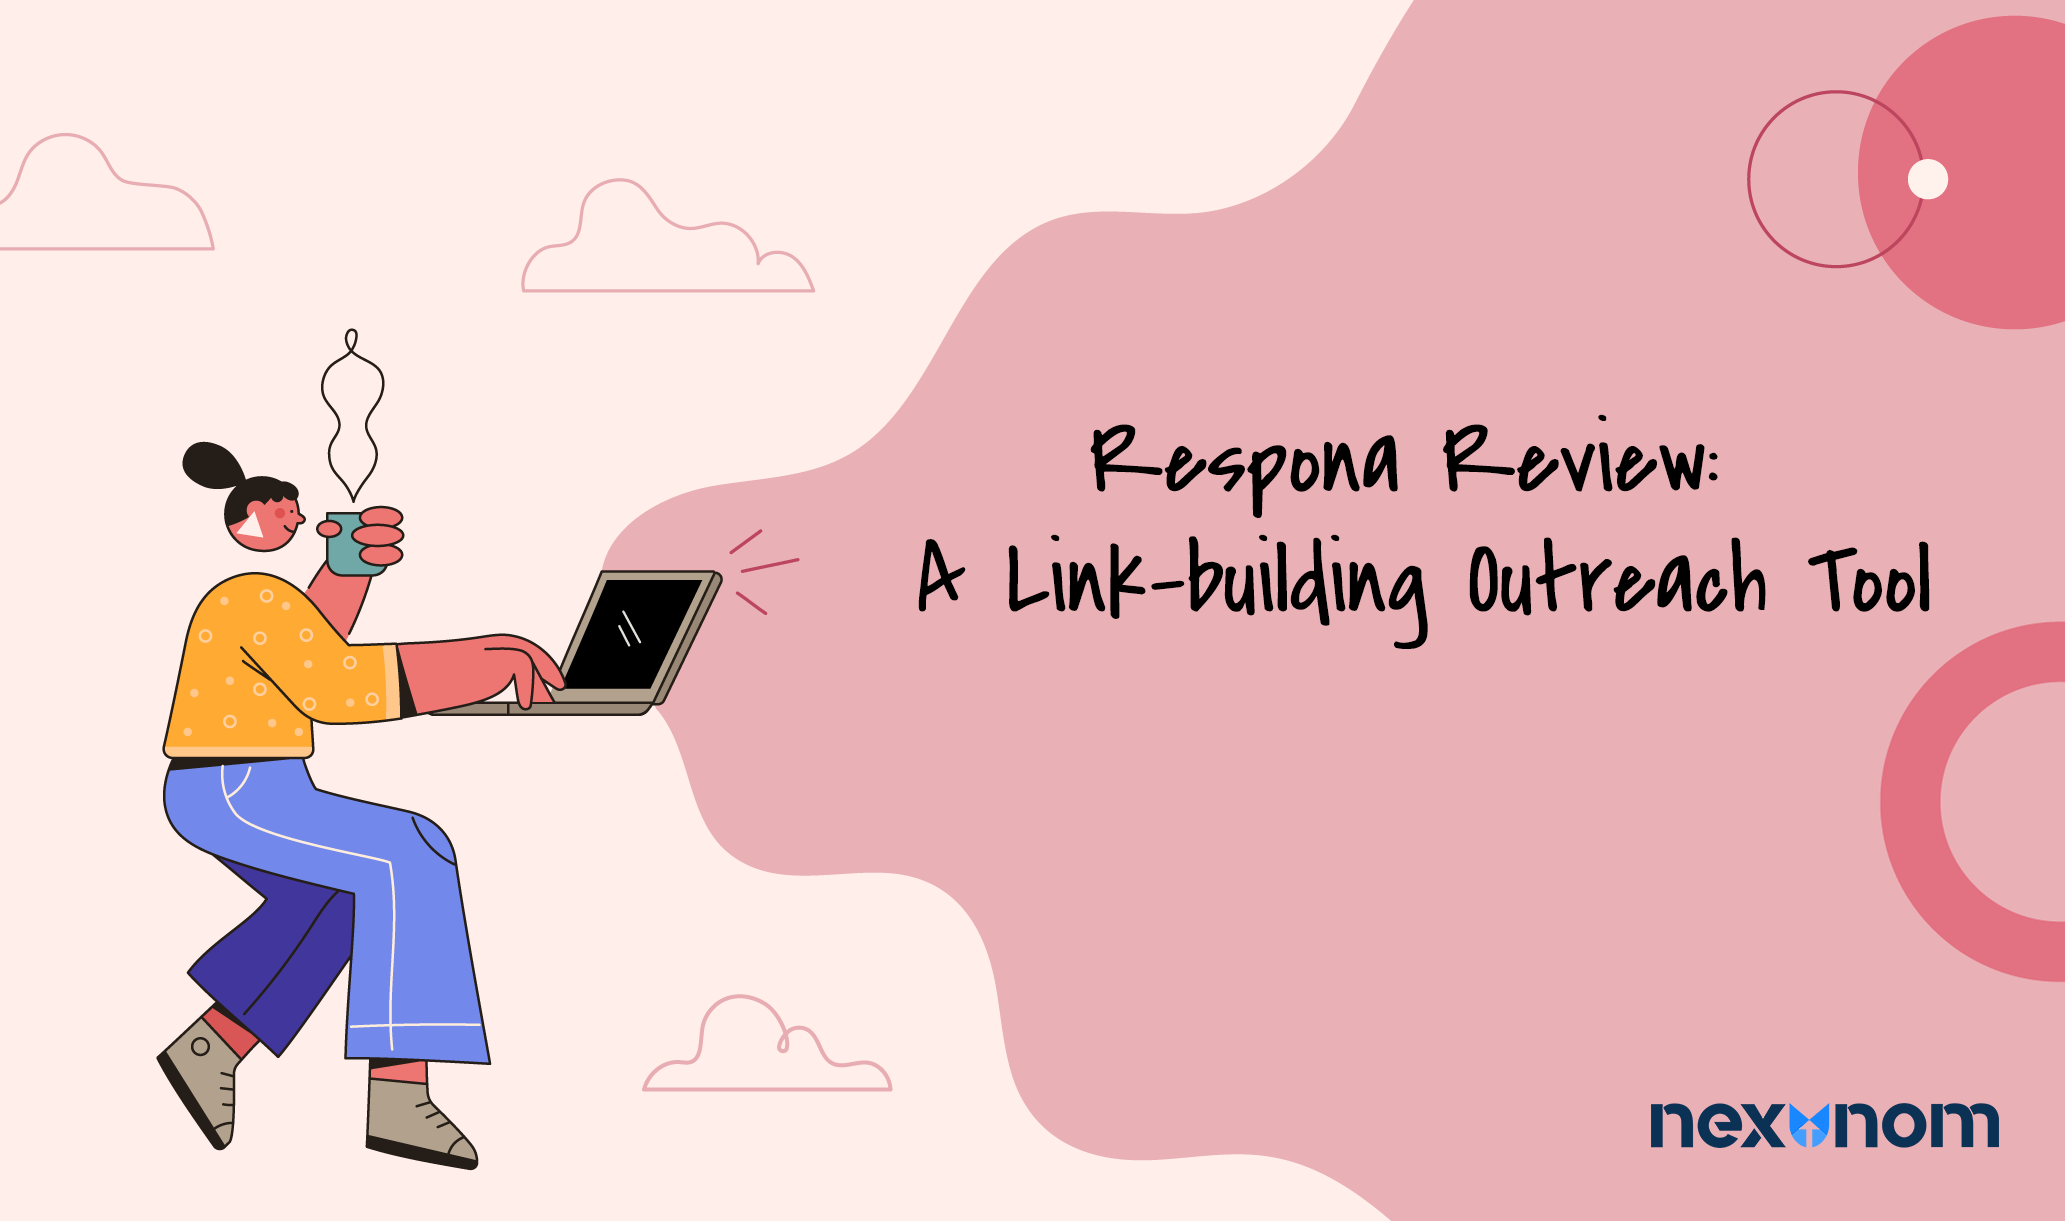 Respona link-builidng outreach tool Review